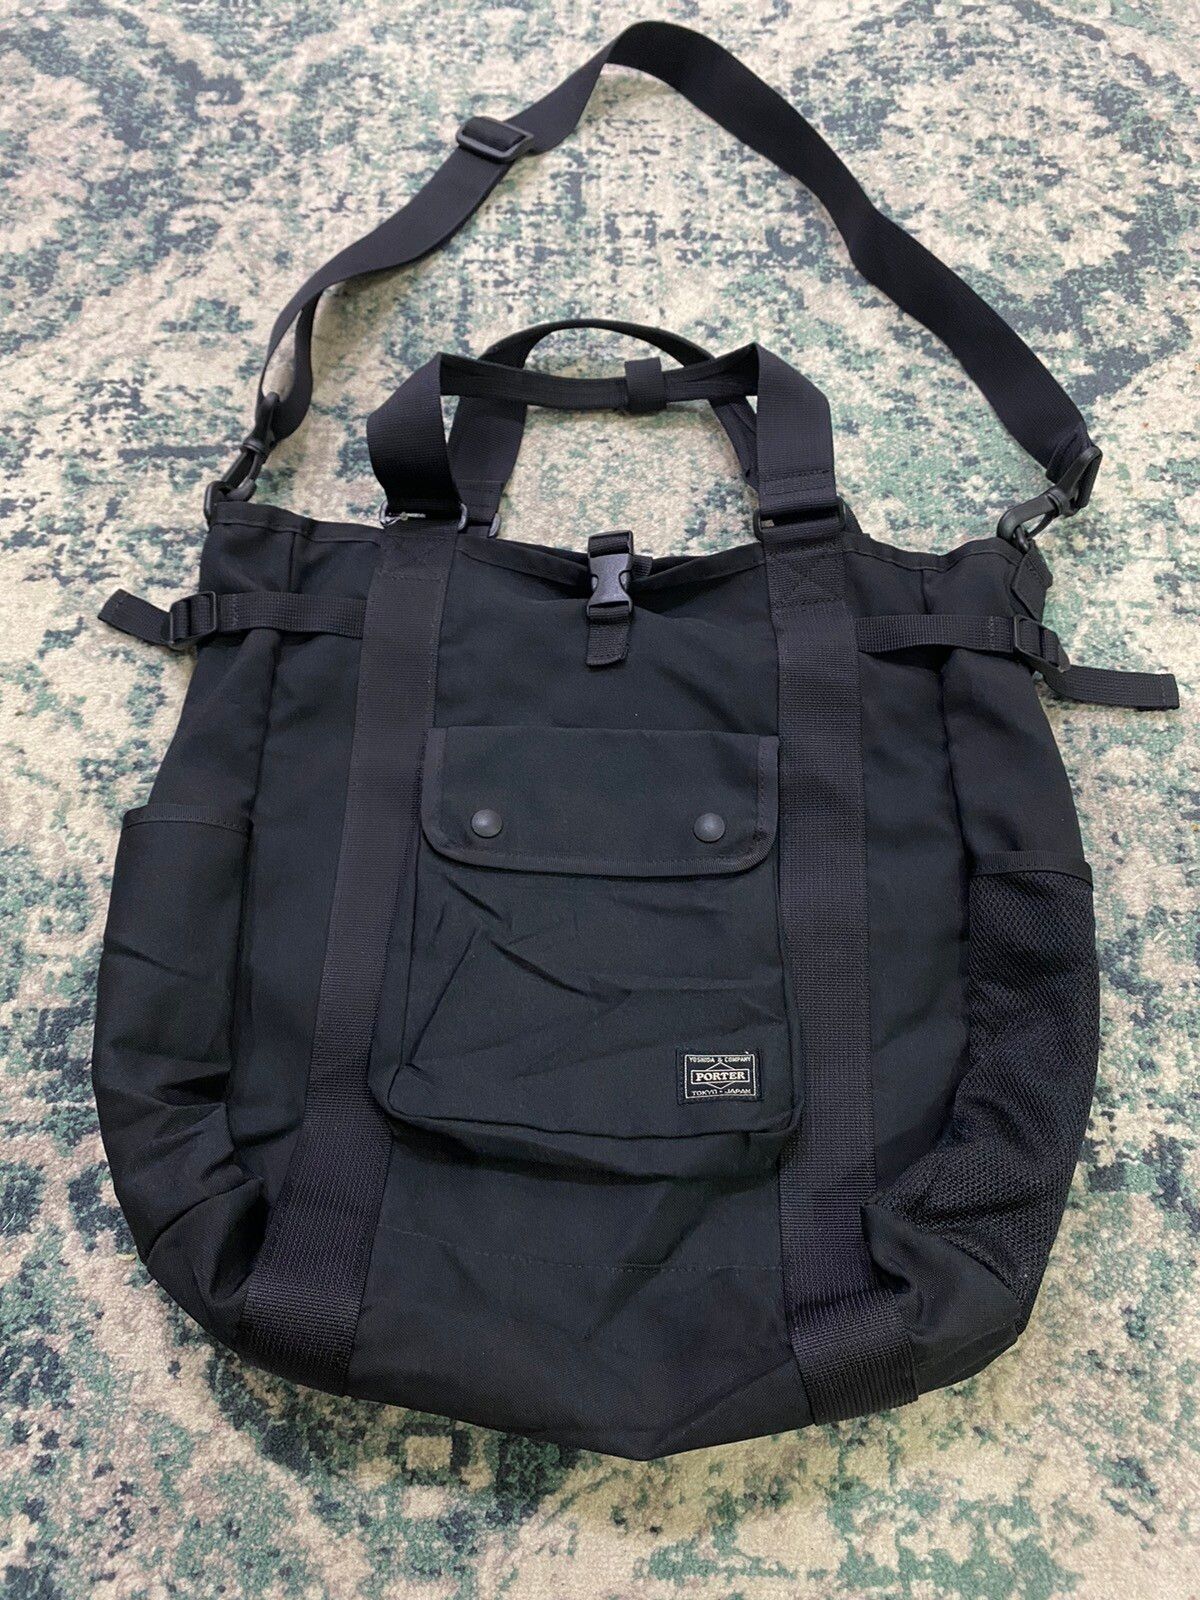 Porter Military 2 in 1 Travel/Outdoor Bag - 3